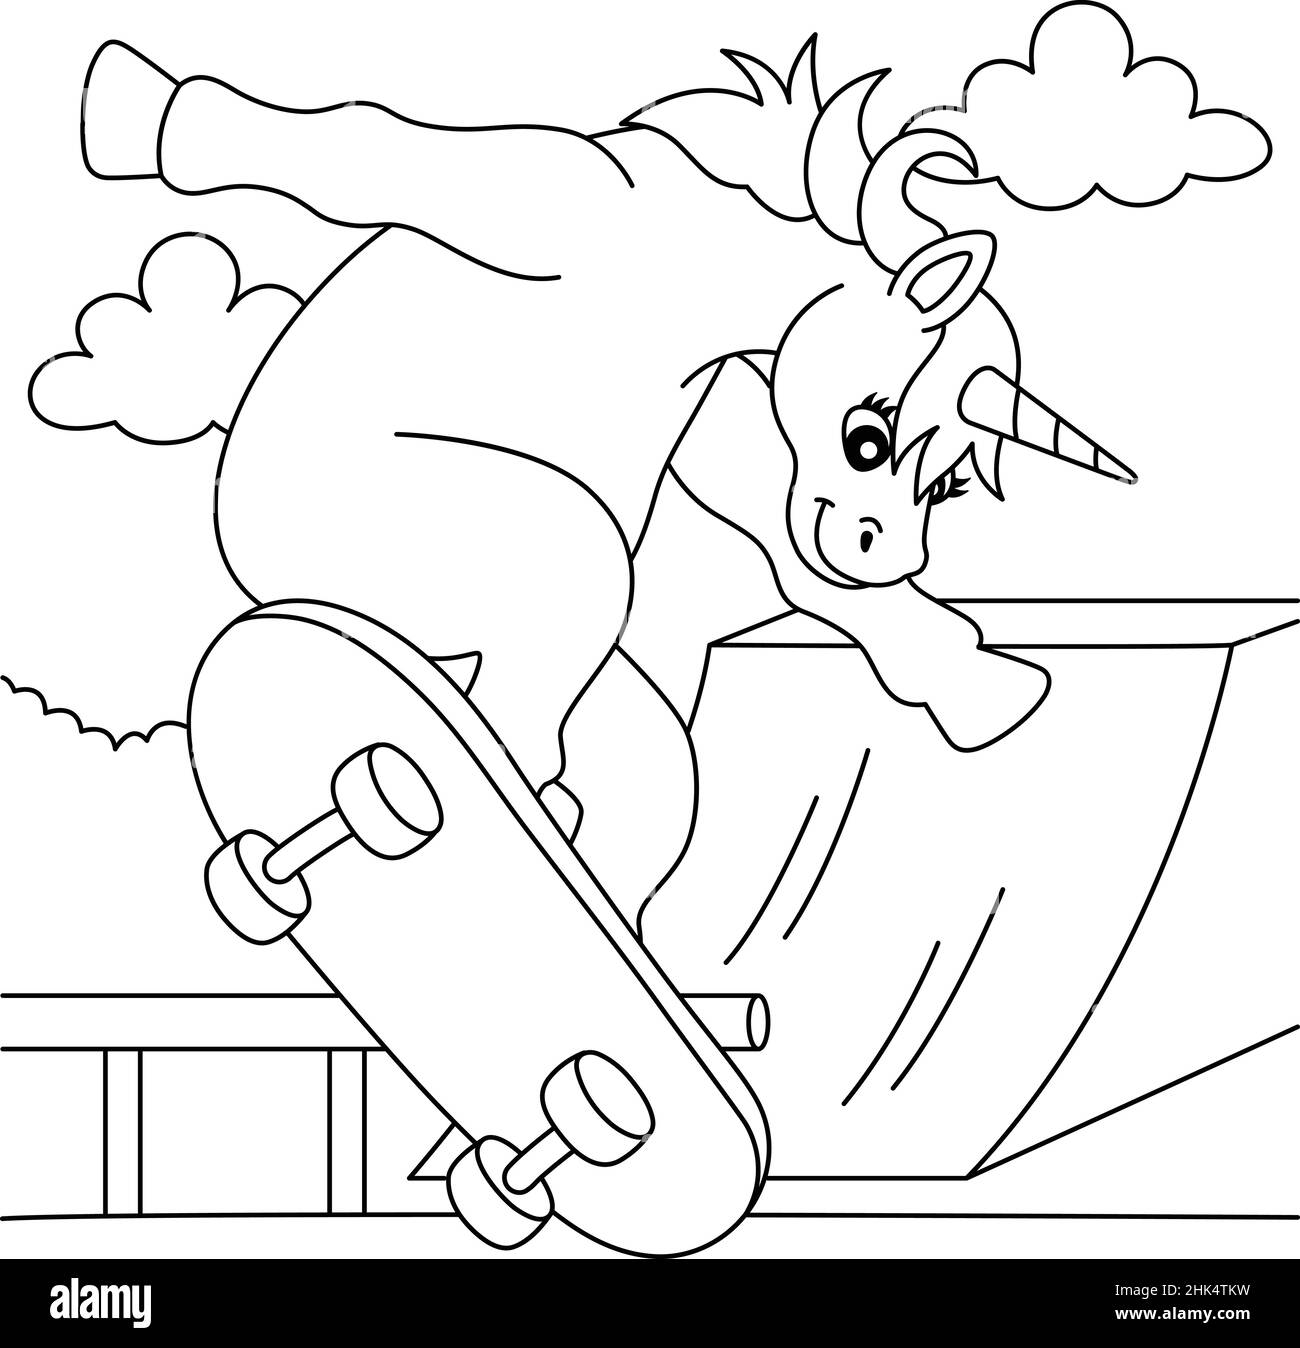 Coloring page unicorn black and white stock photos images